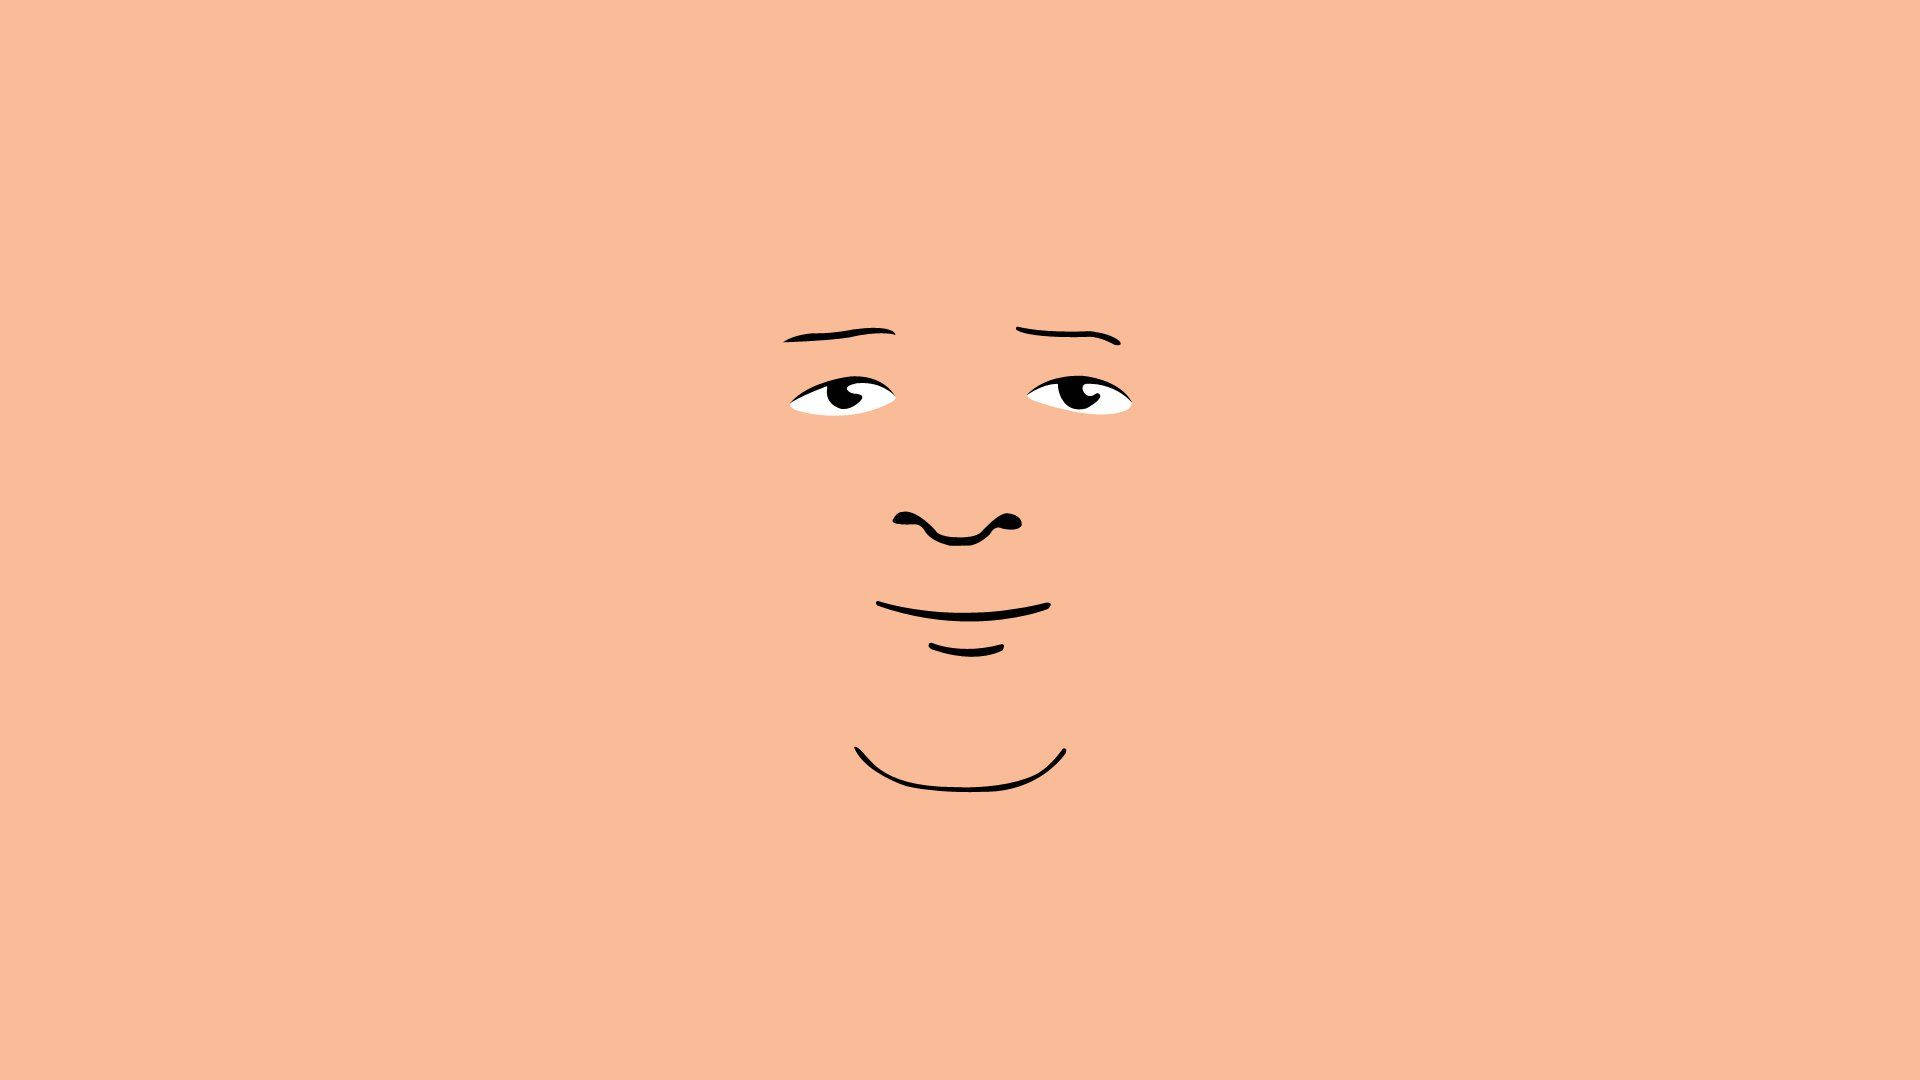 Bobby Hill Peach Face Print Baghoveder Wallpaper